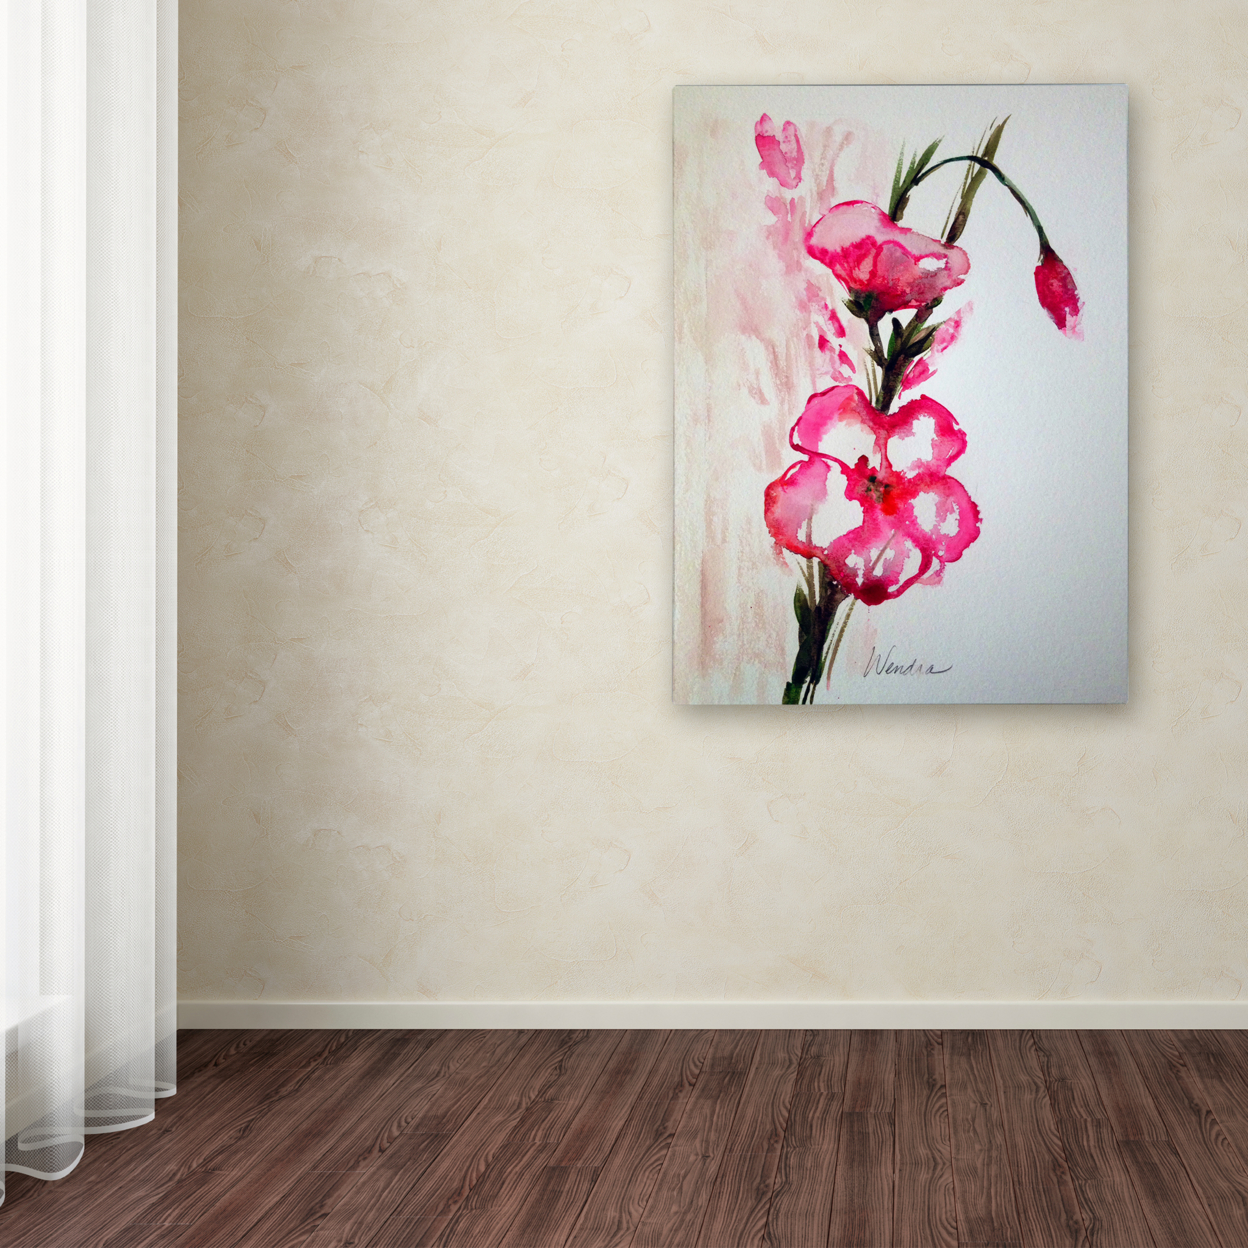 Wendra 'New Bloom' Canvas Wall Art 35 X 47 Inches